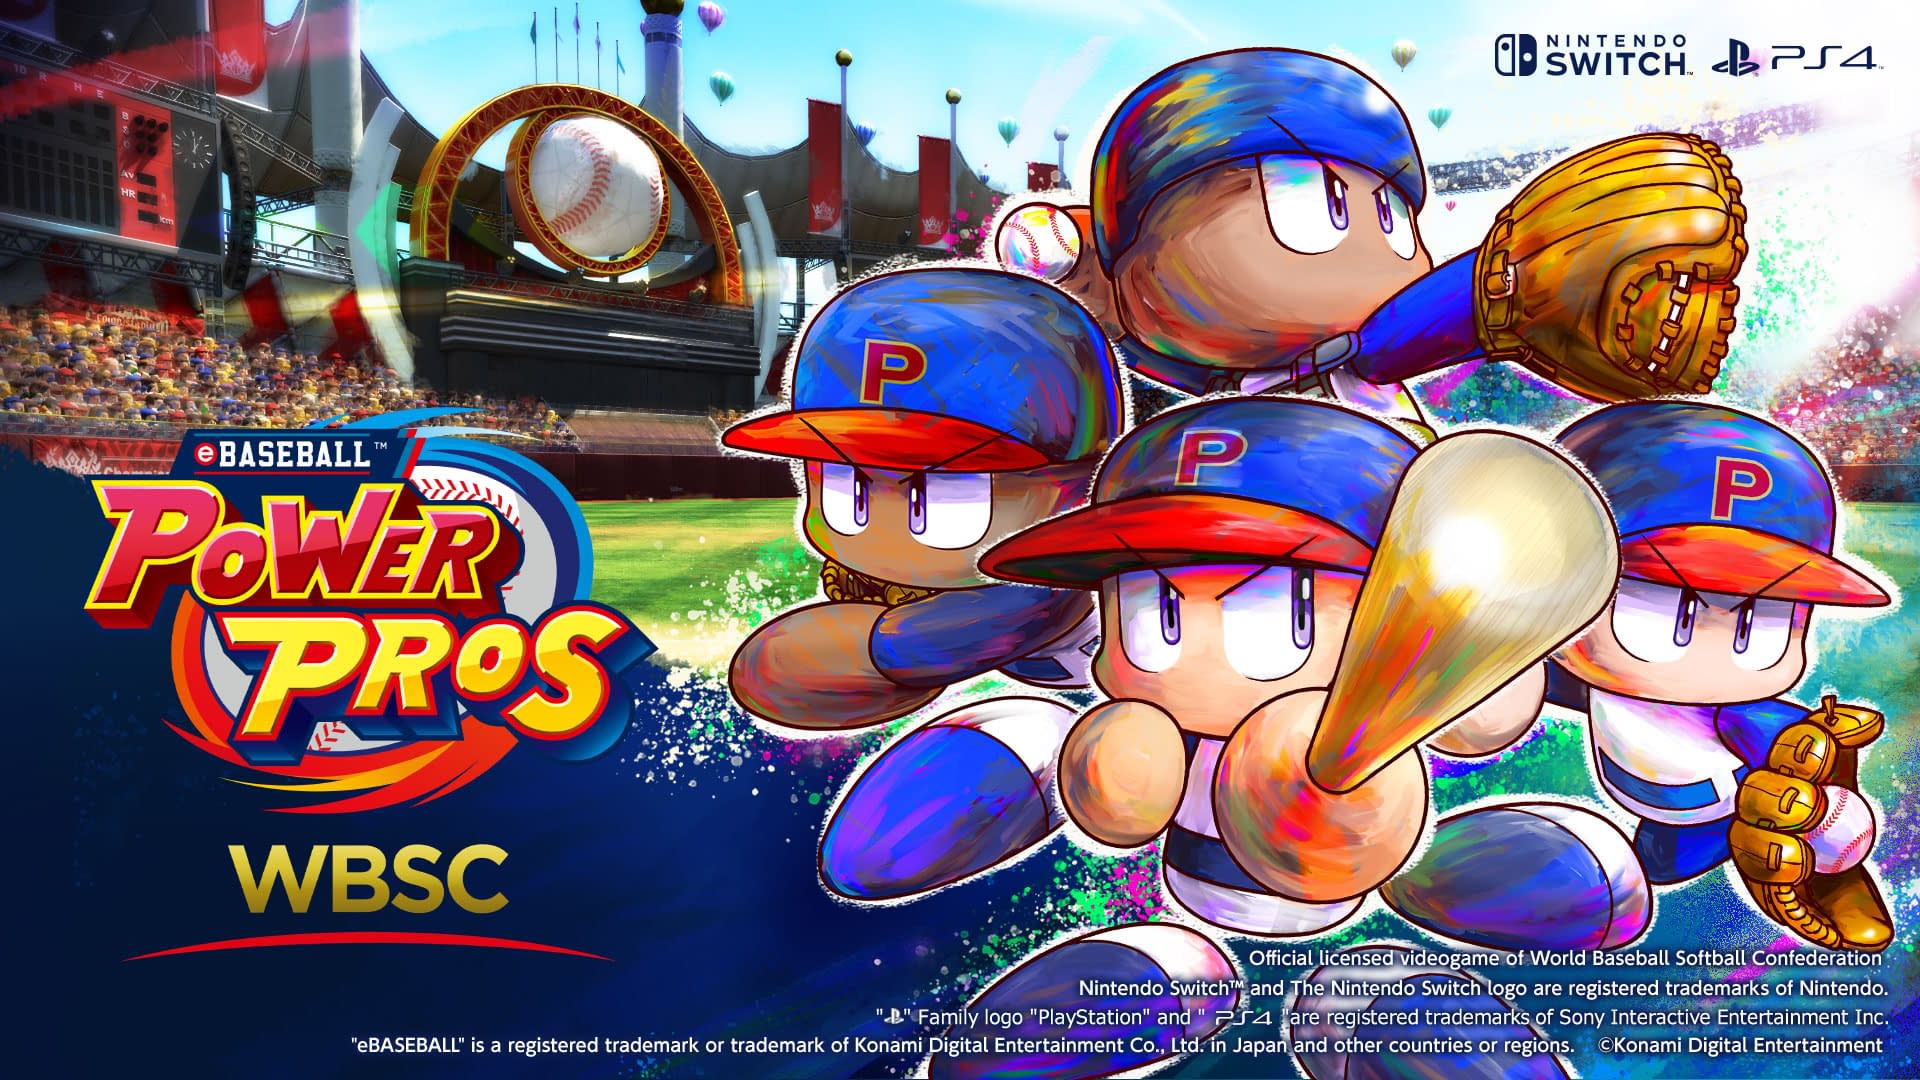 ebaseball: POWER PROS Olympic Esports Series 2023 One of the Official Games